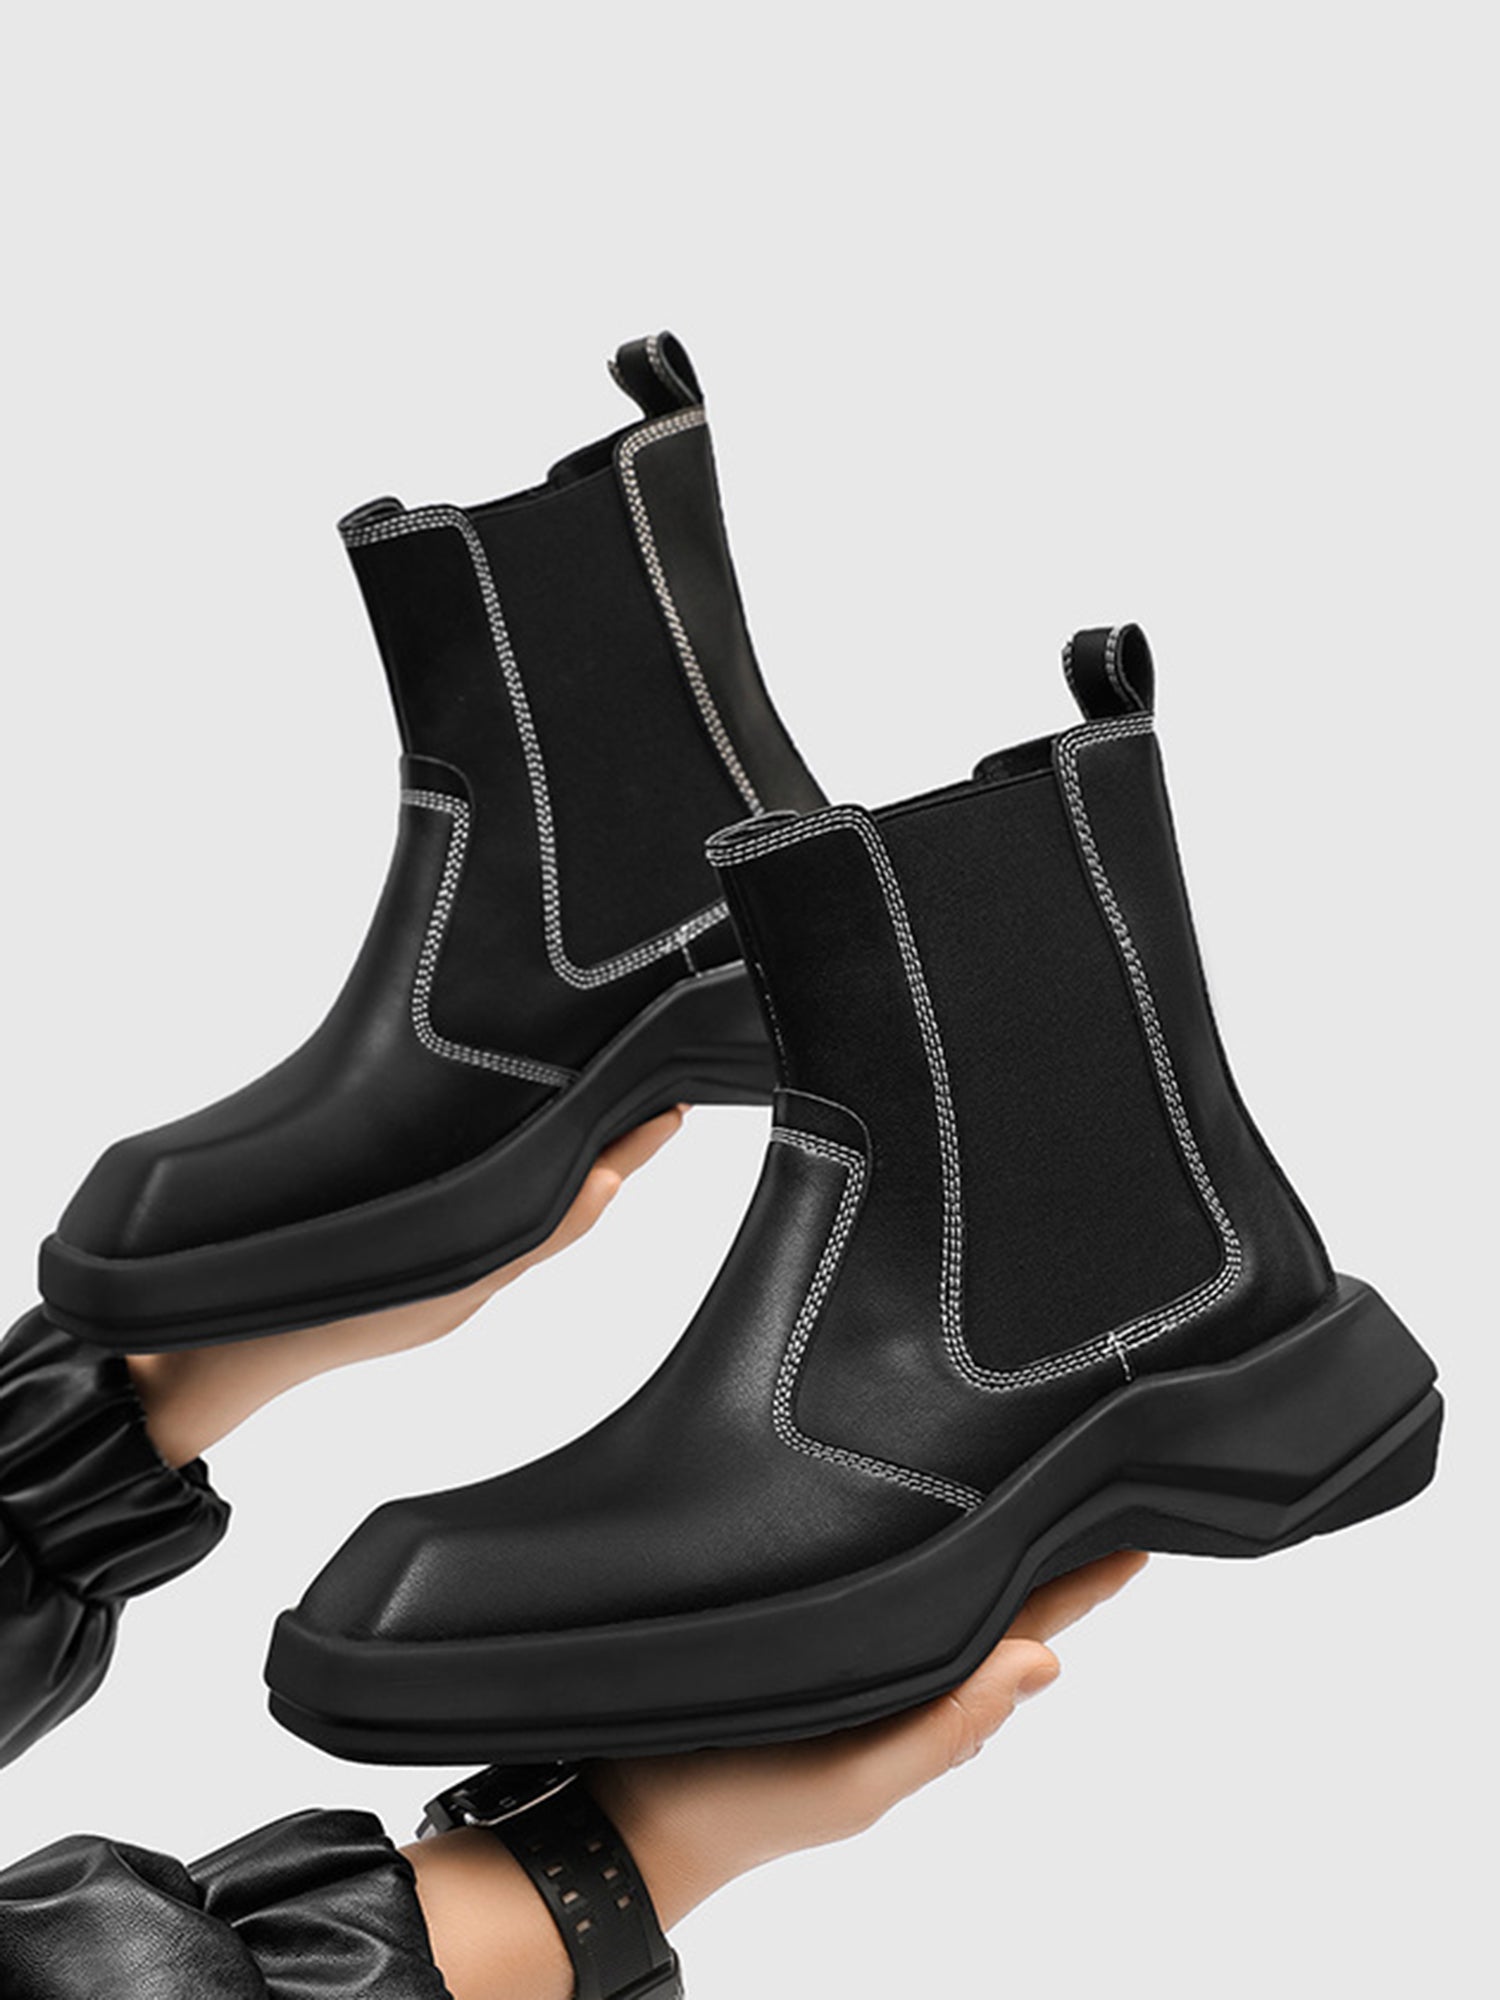 British Style High Top Versatile Chelsea Motorcycle Boots